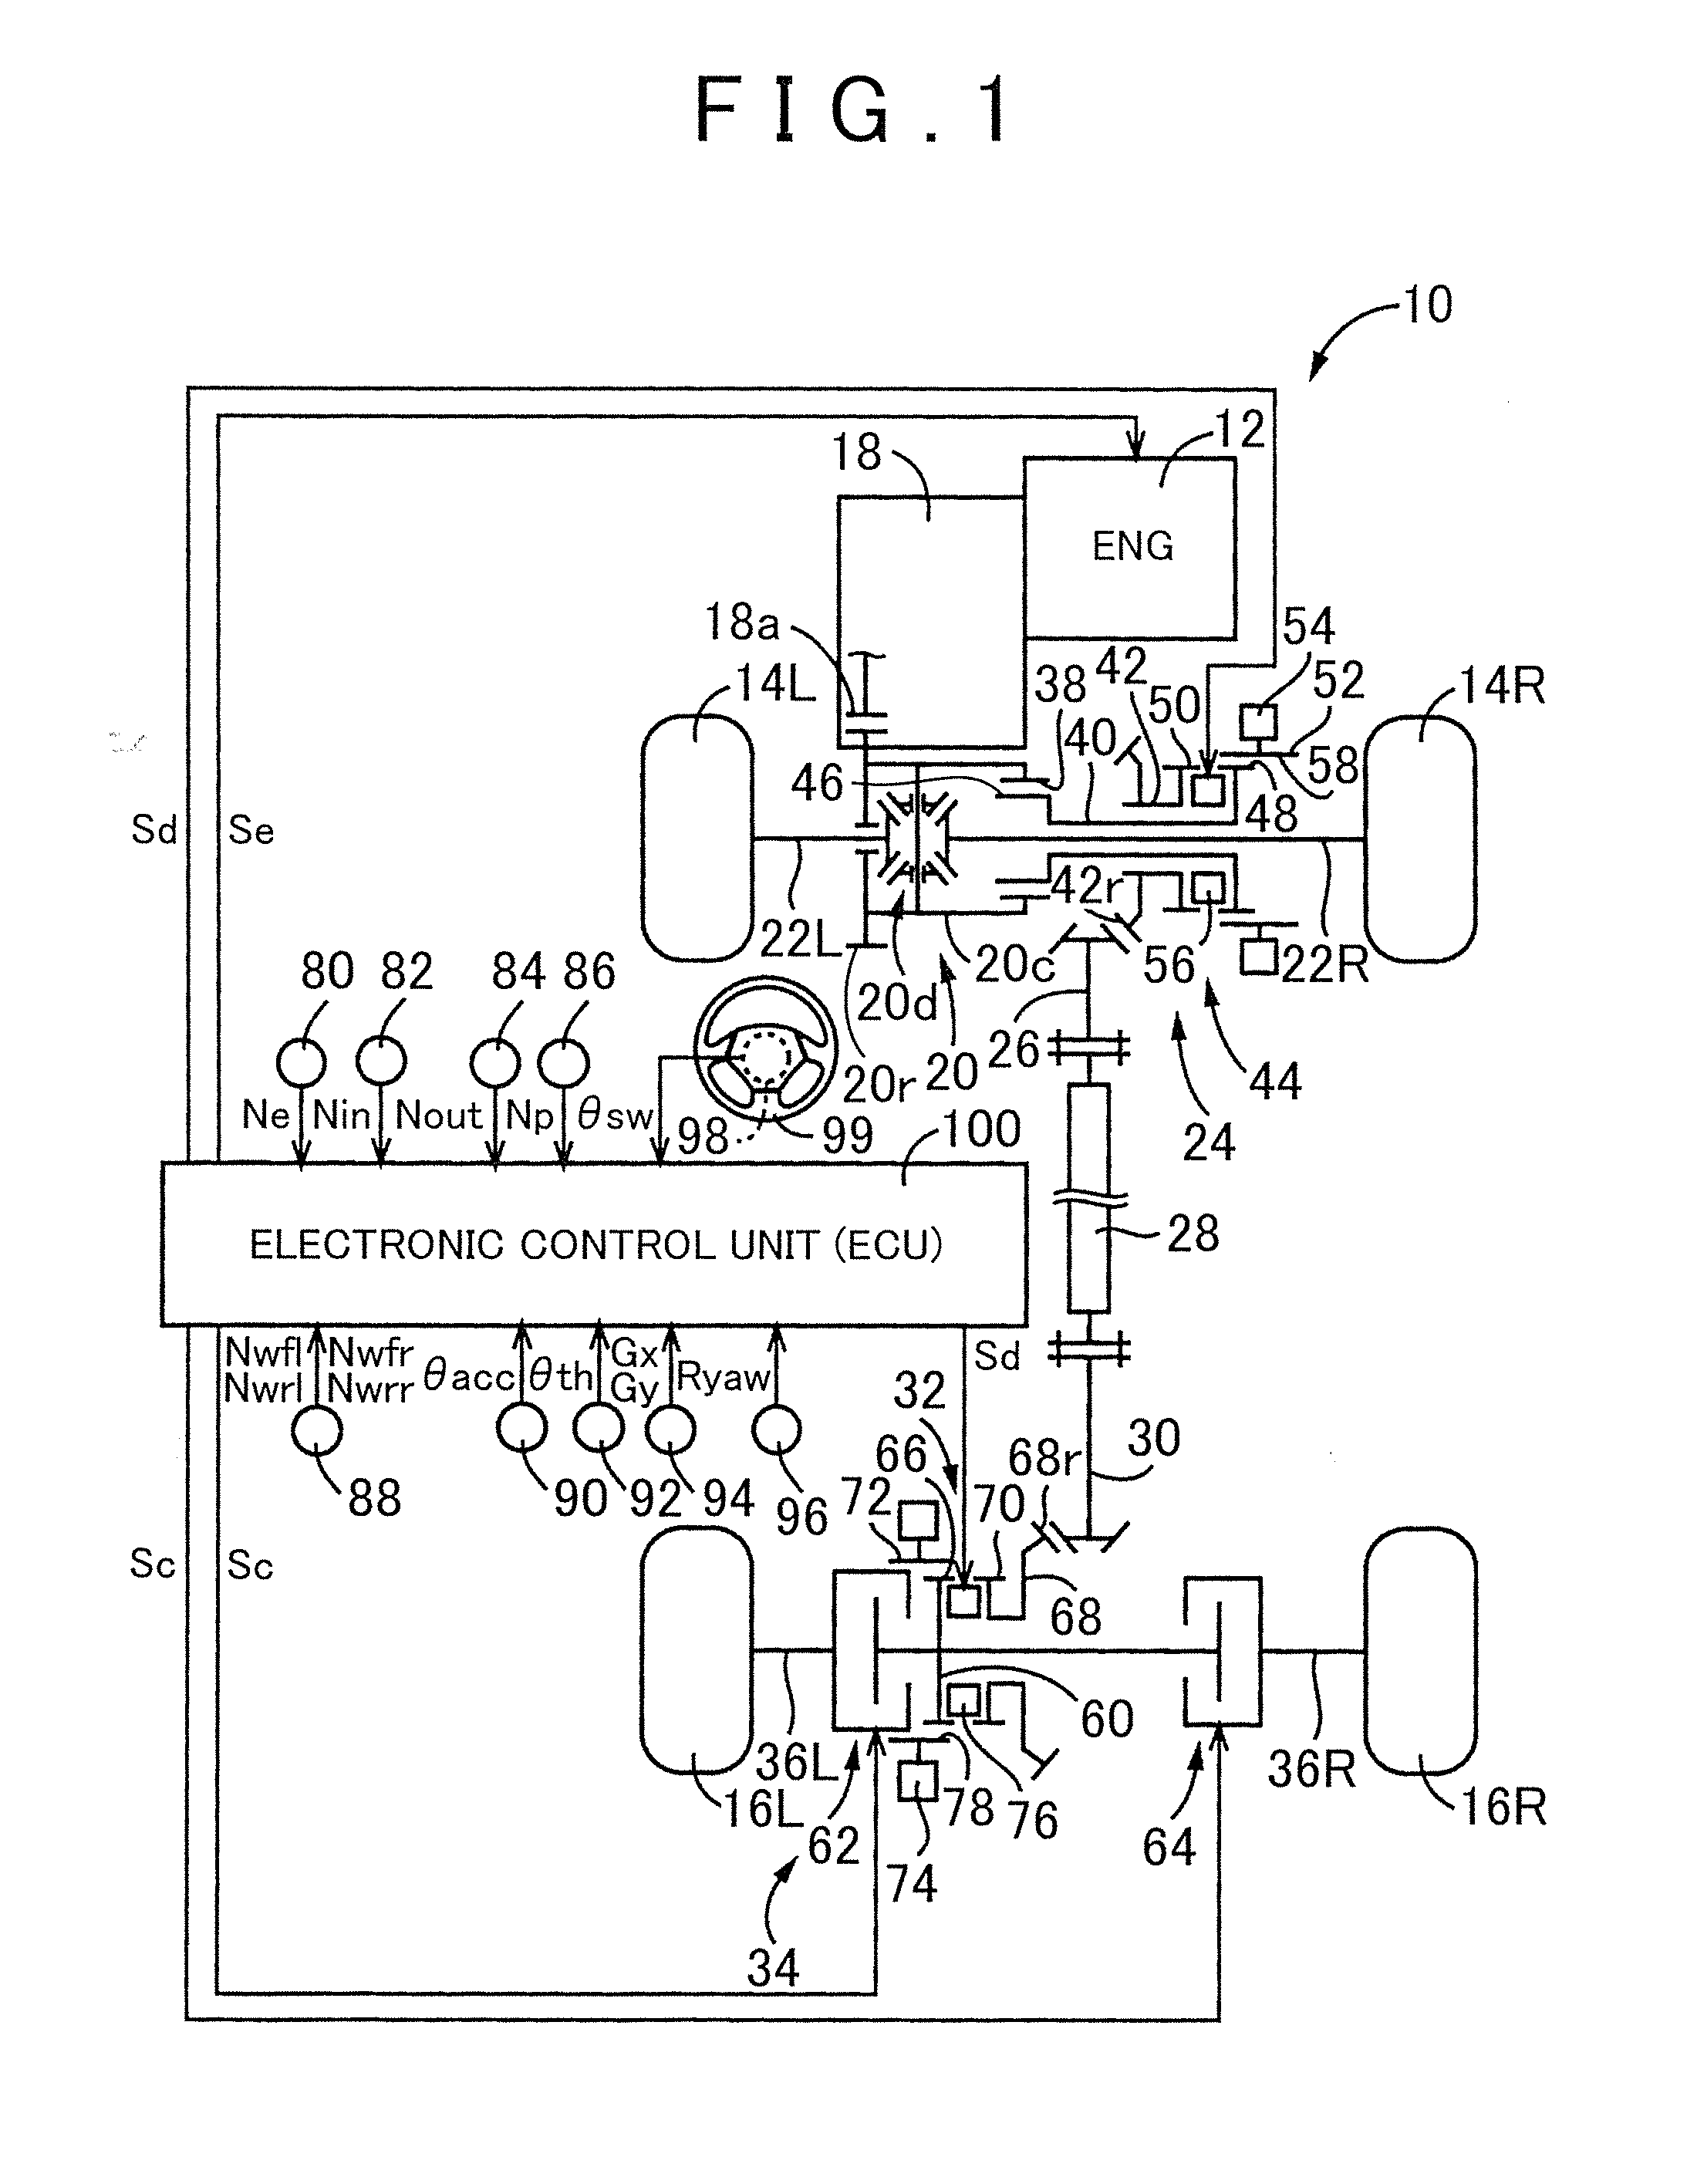 Control system for four-wheel-drive vehicle